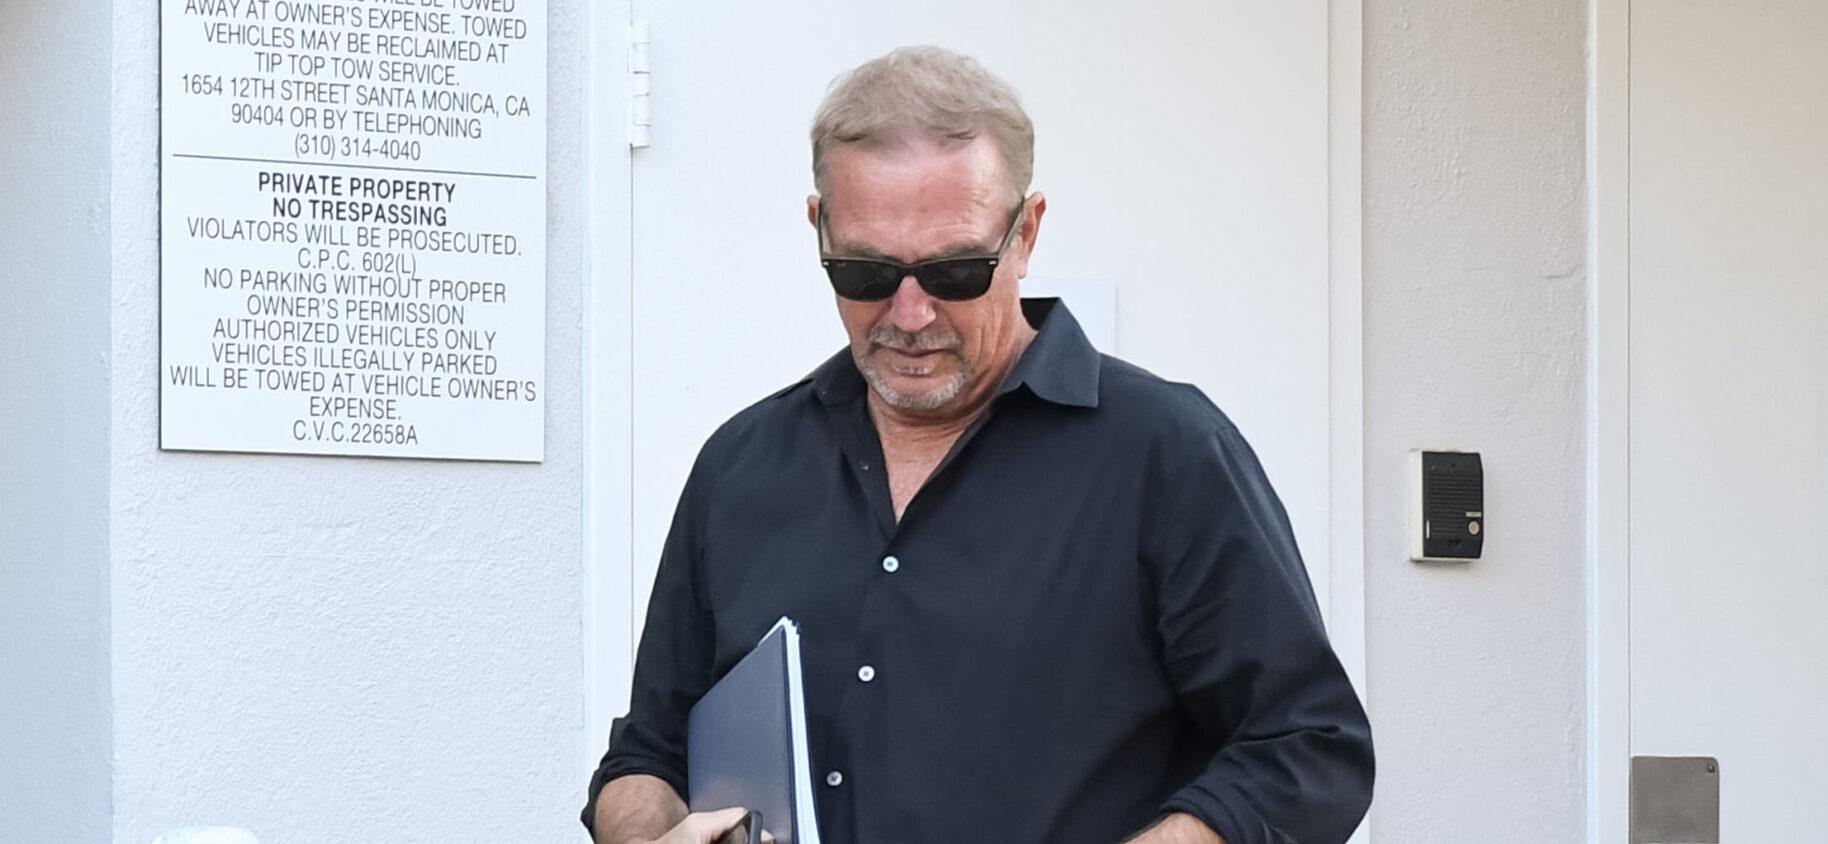 Kevin Costner’s Wife Is Refusing To Vacate The Marital Home Amid Accusations Of Missing Money